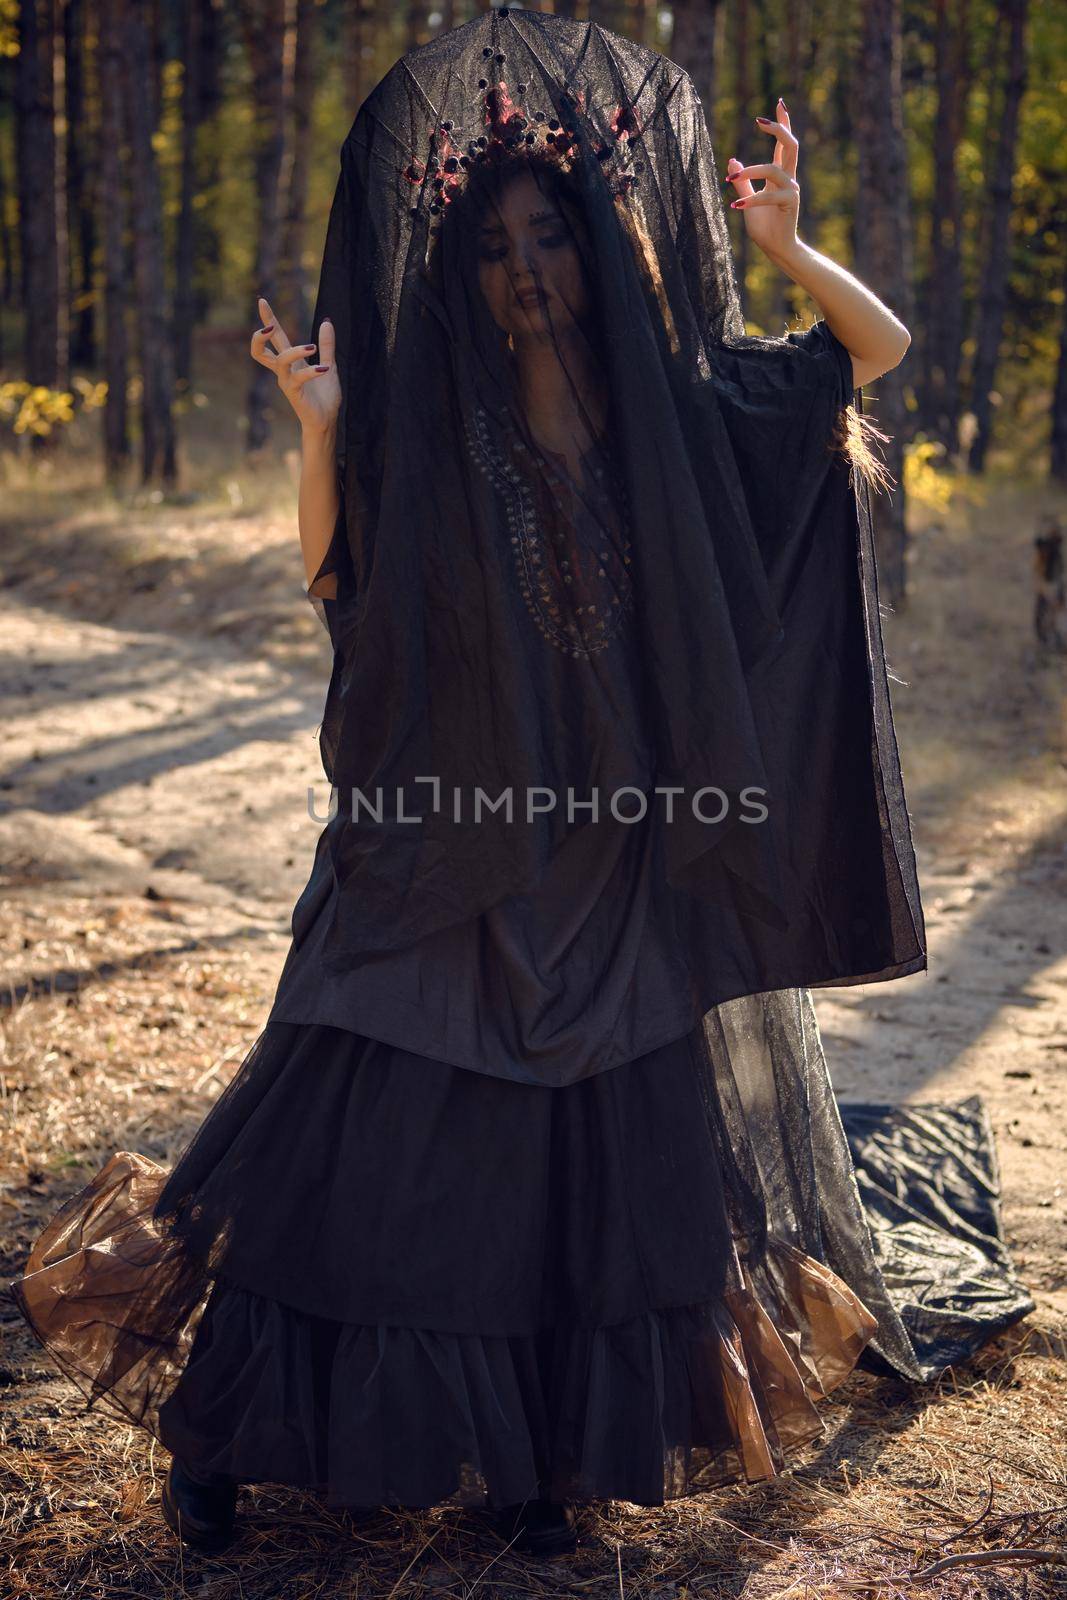 Witch in black, long dress, with red crown in her long, curly hair under a black veil. Posing in pine forest. Spells, magic and witchcraft. Close-up. by nazarovsergey